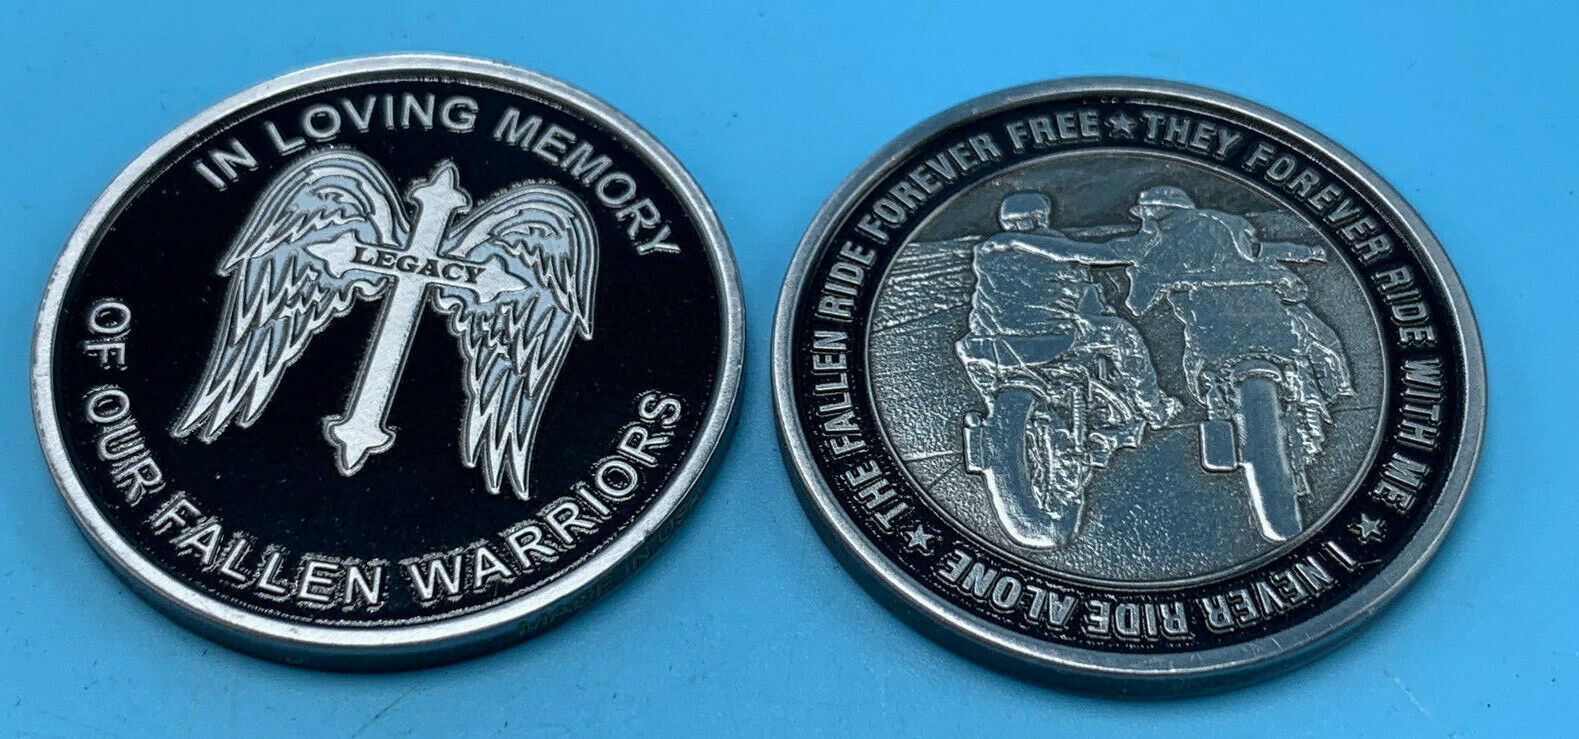 In Loving Memory of our Fallen Warriors Coin